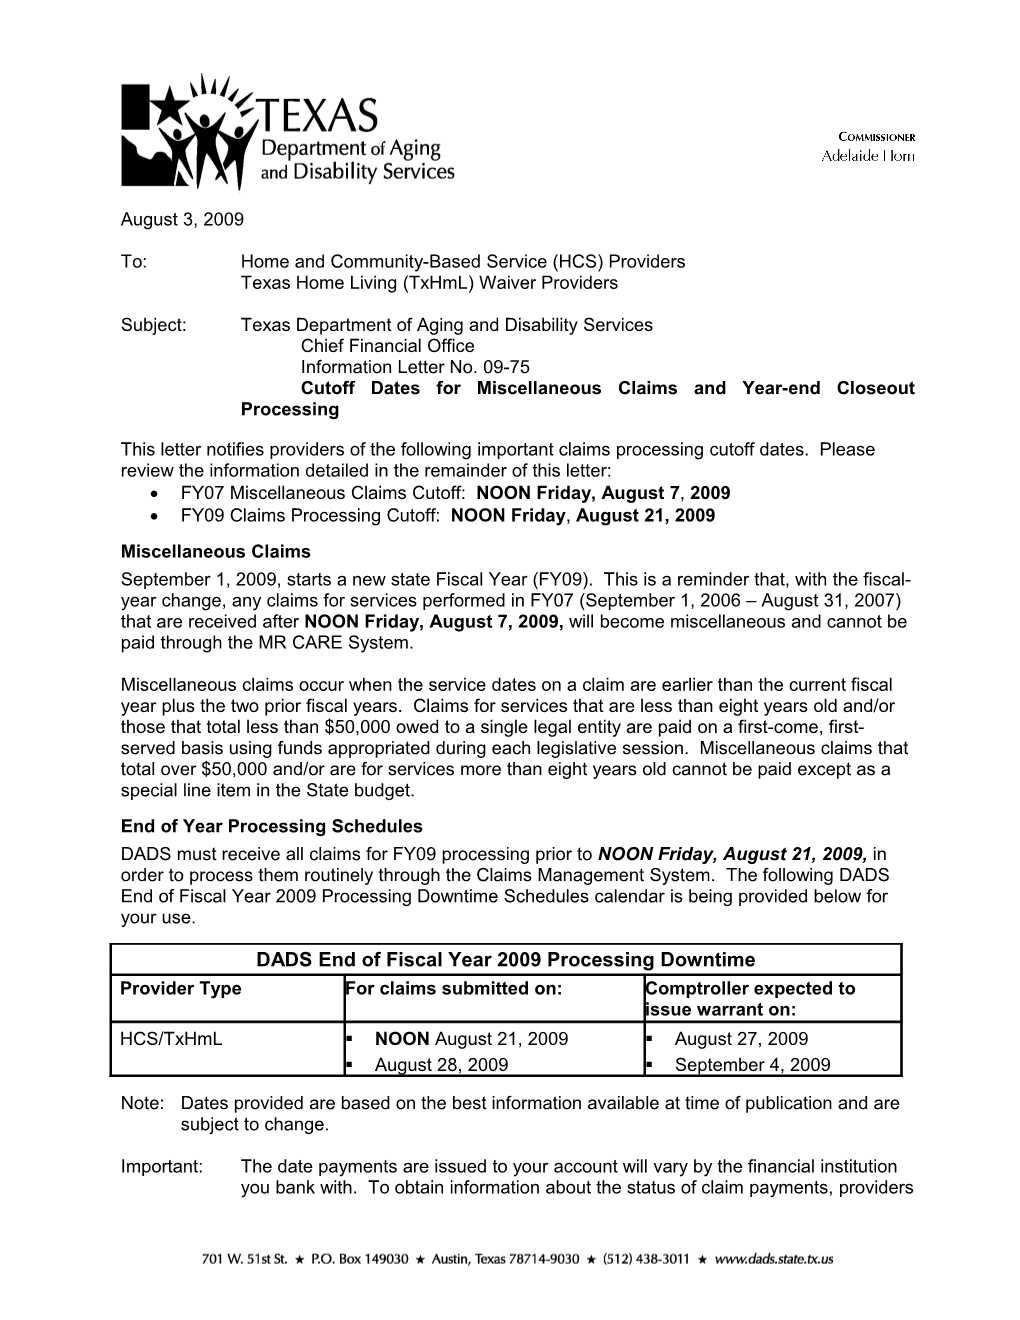 IL 09-075 Cutoff Dates for Miscellaneous Claims and Year-End Closeout Processing